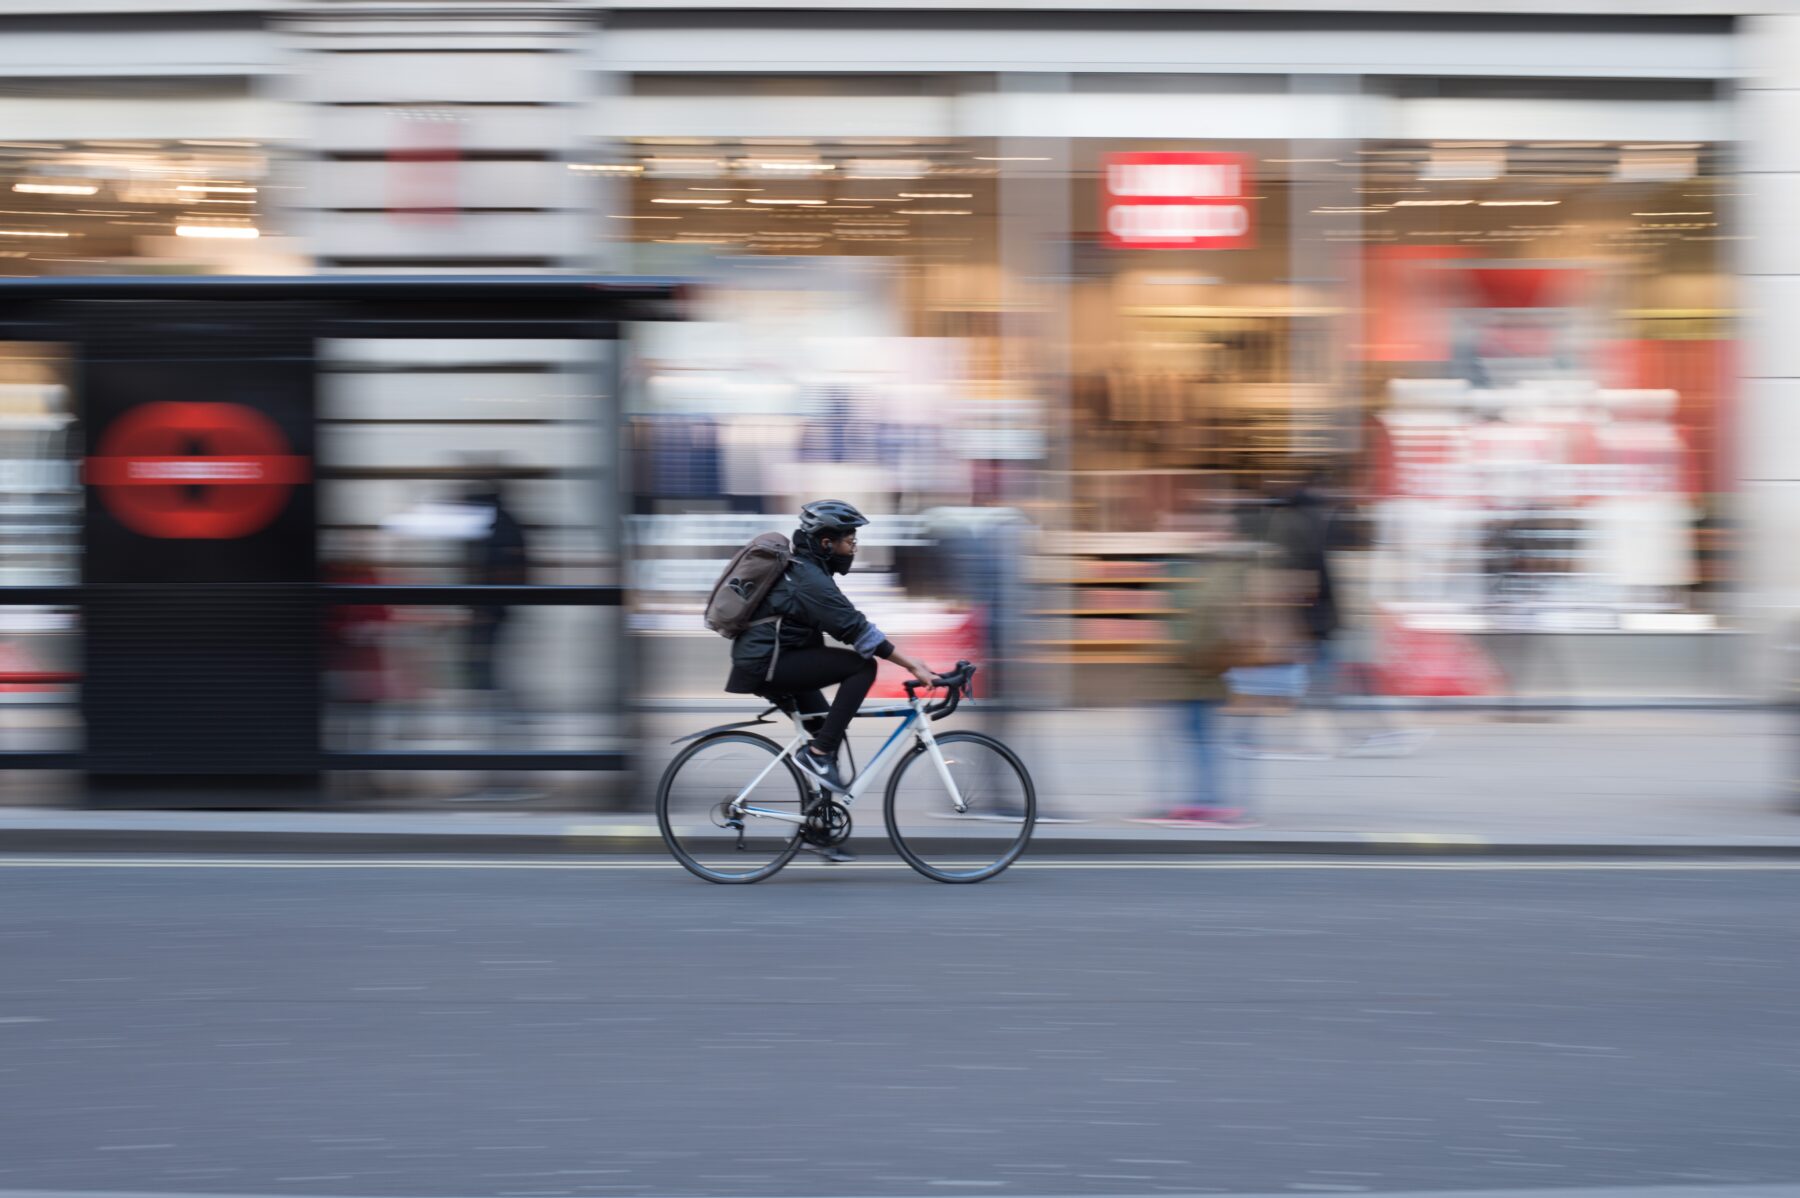 A bicyclist riding on a city street with blurry storefronts in the background